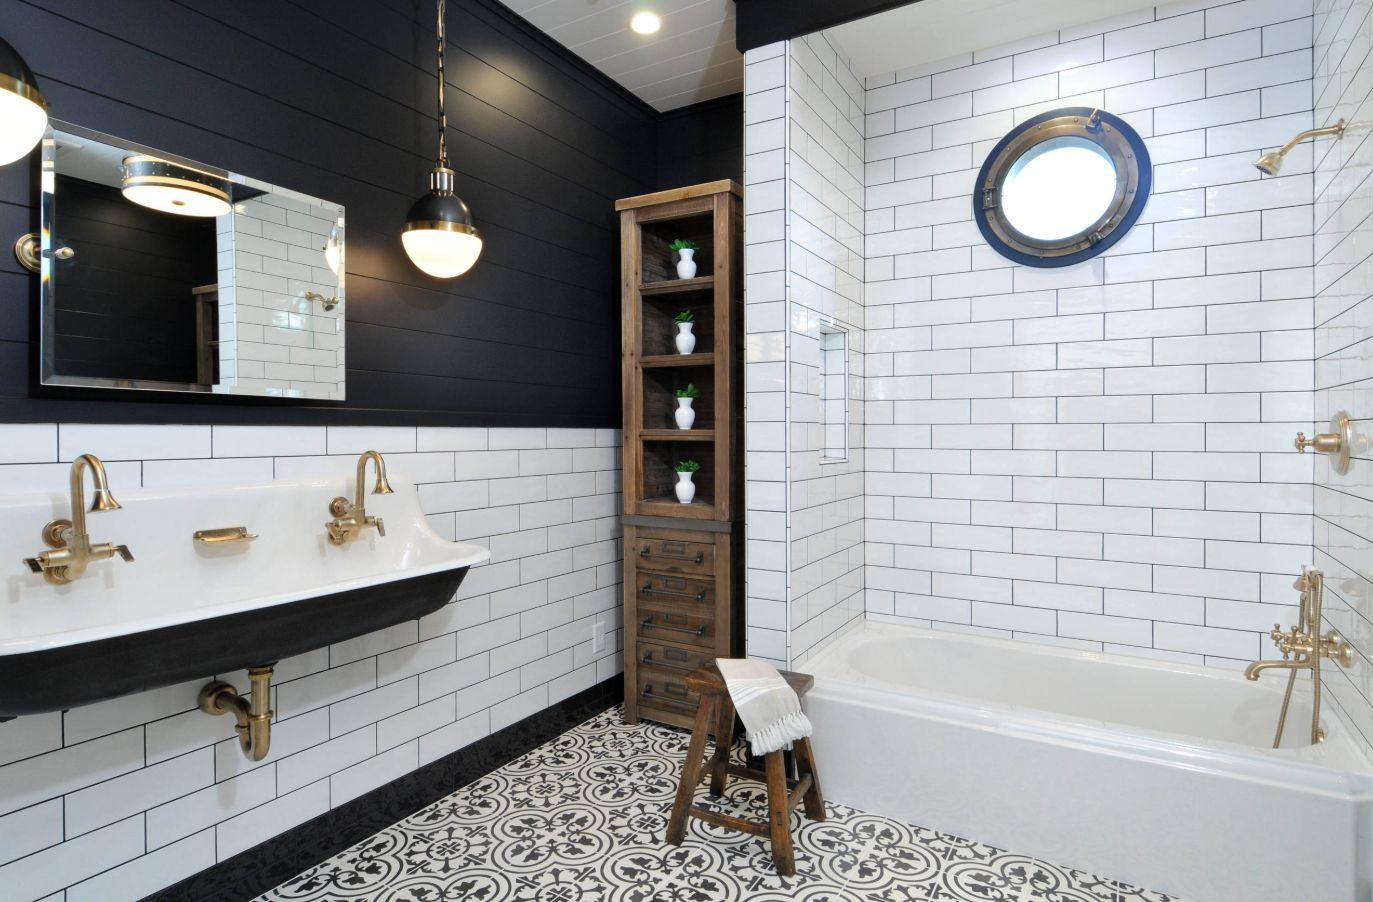 Black and White Bathroom Design for Everyday Beauty